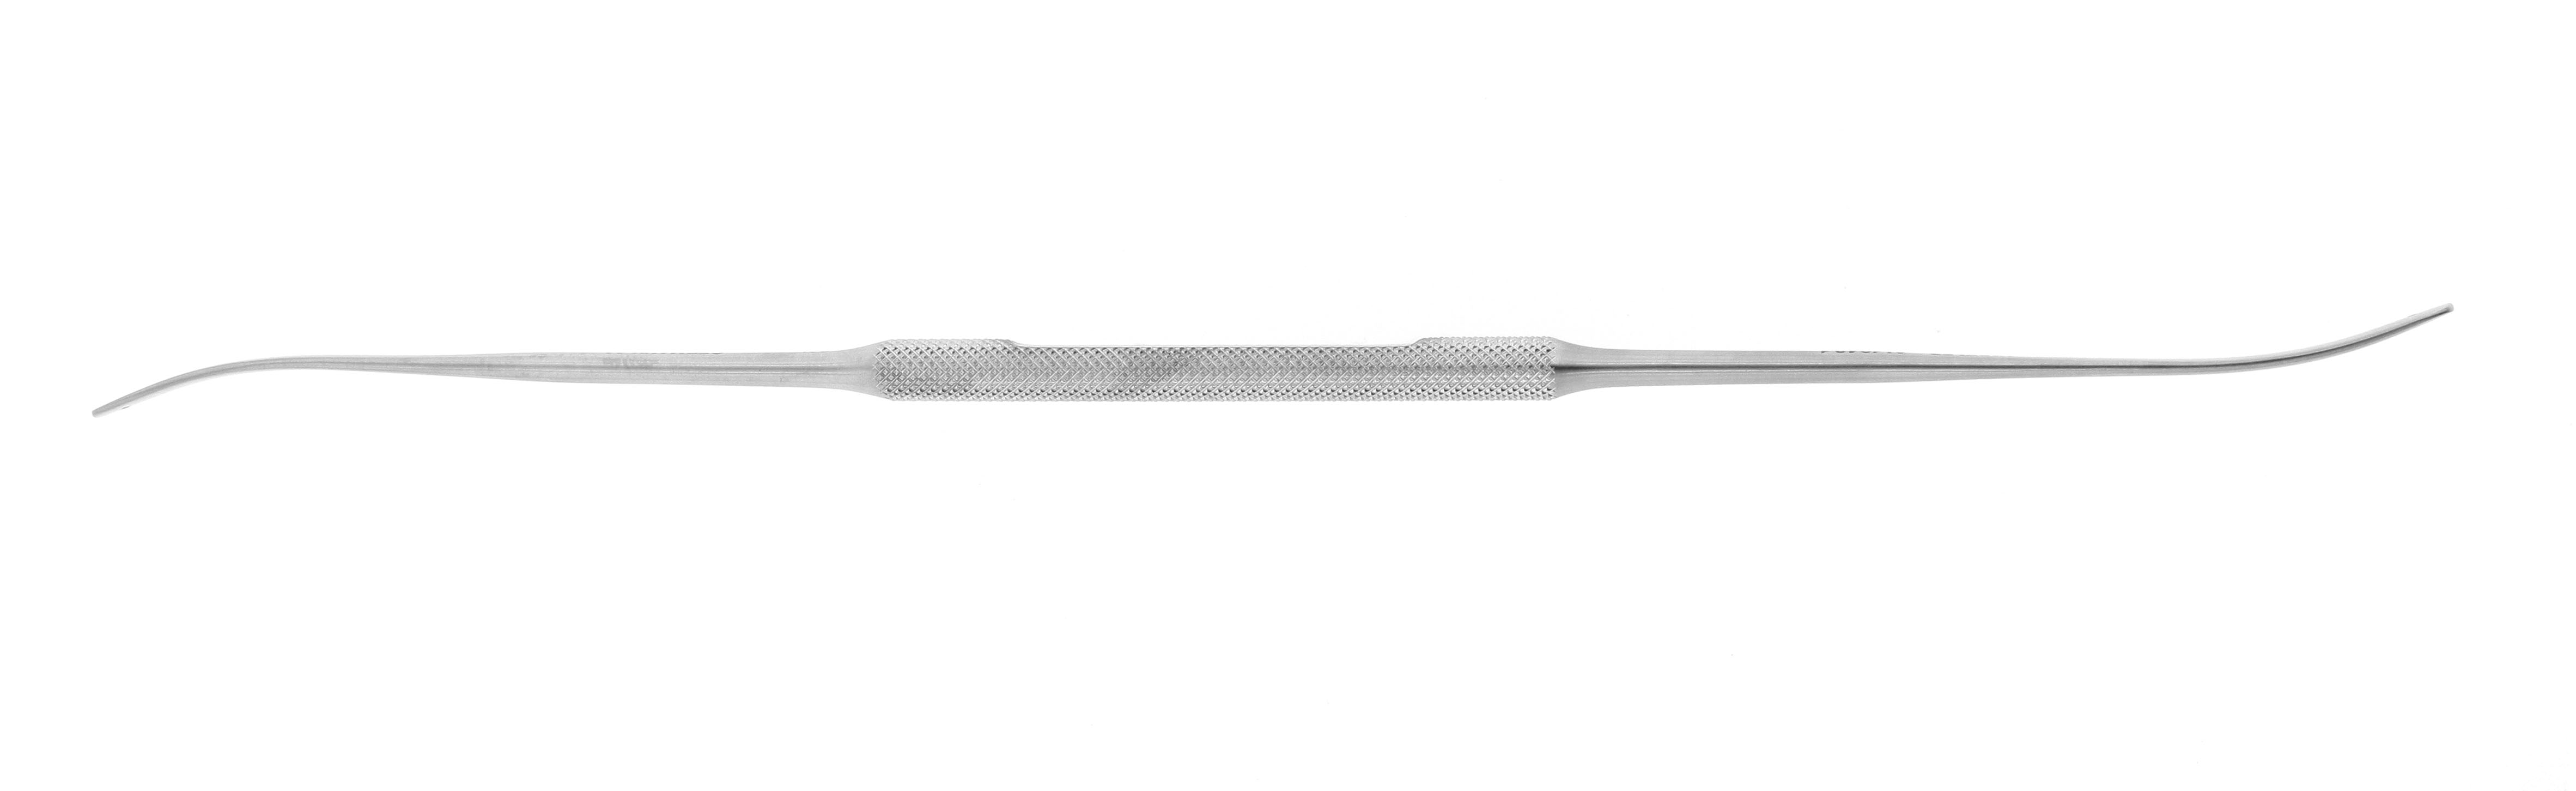 Olivecrona Double Ended Dissector - Regular (4mm x 5mm)